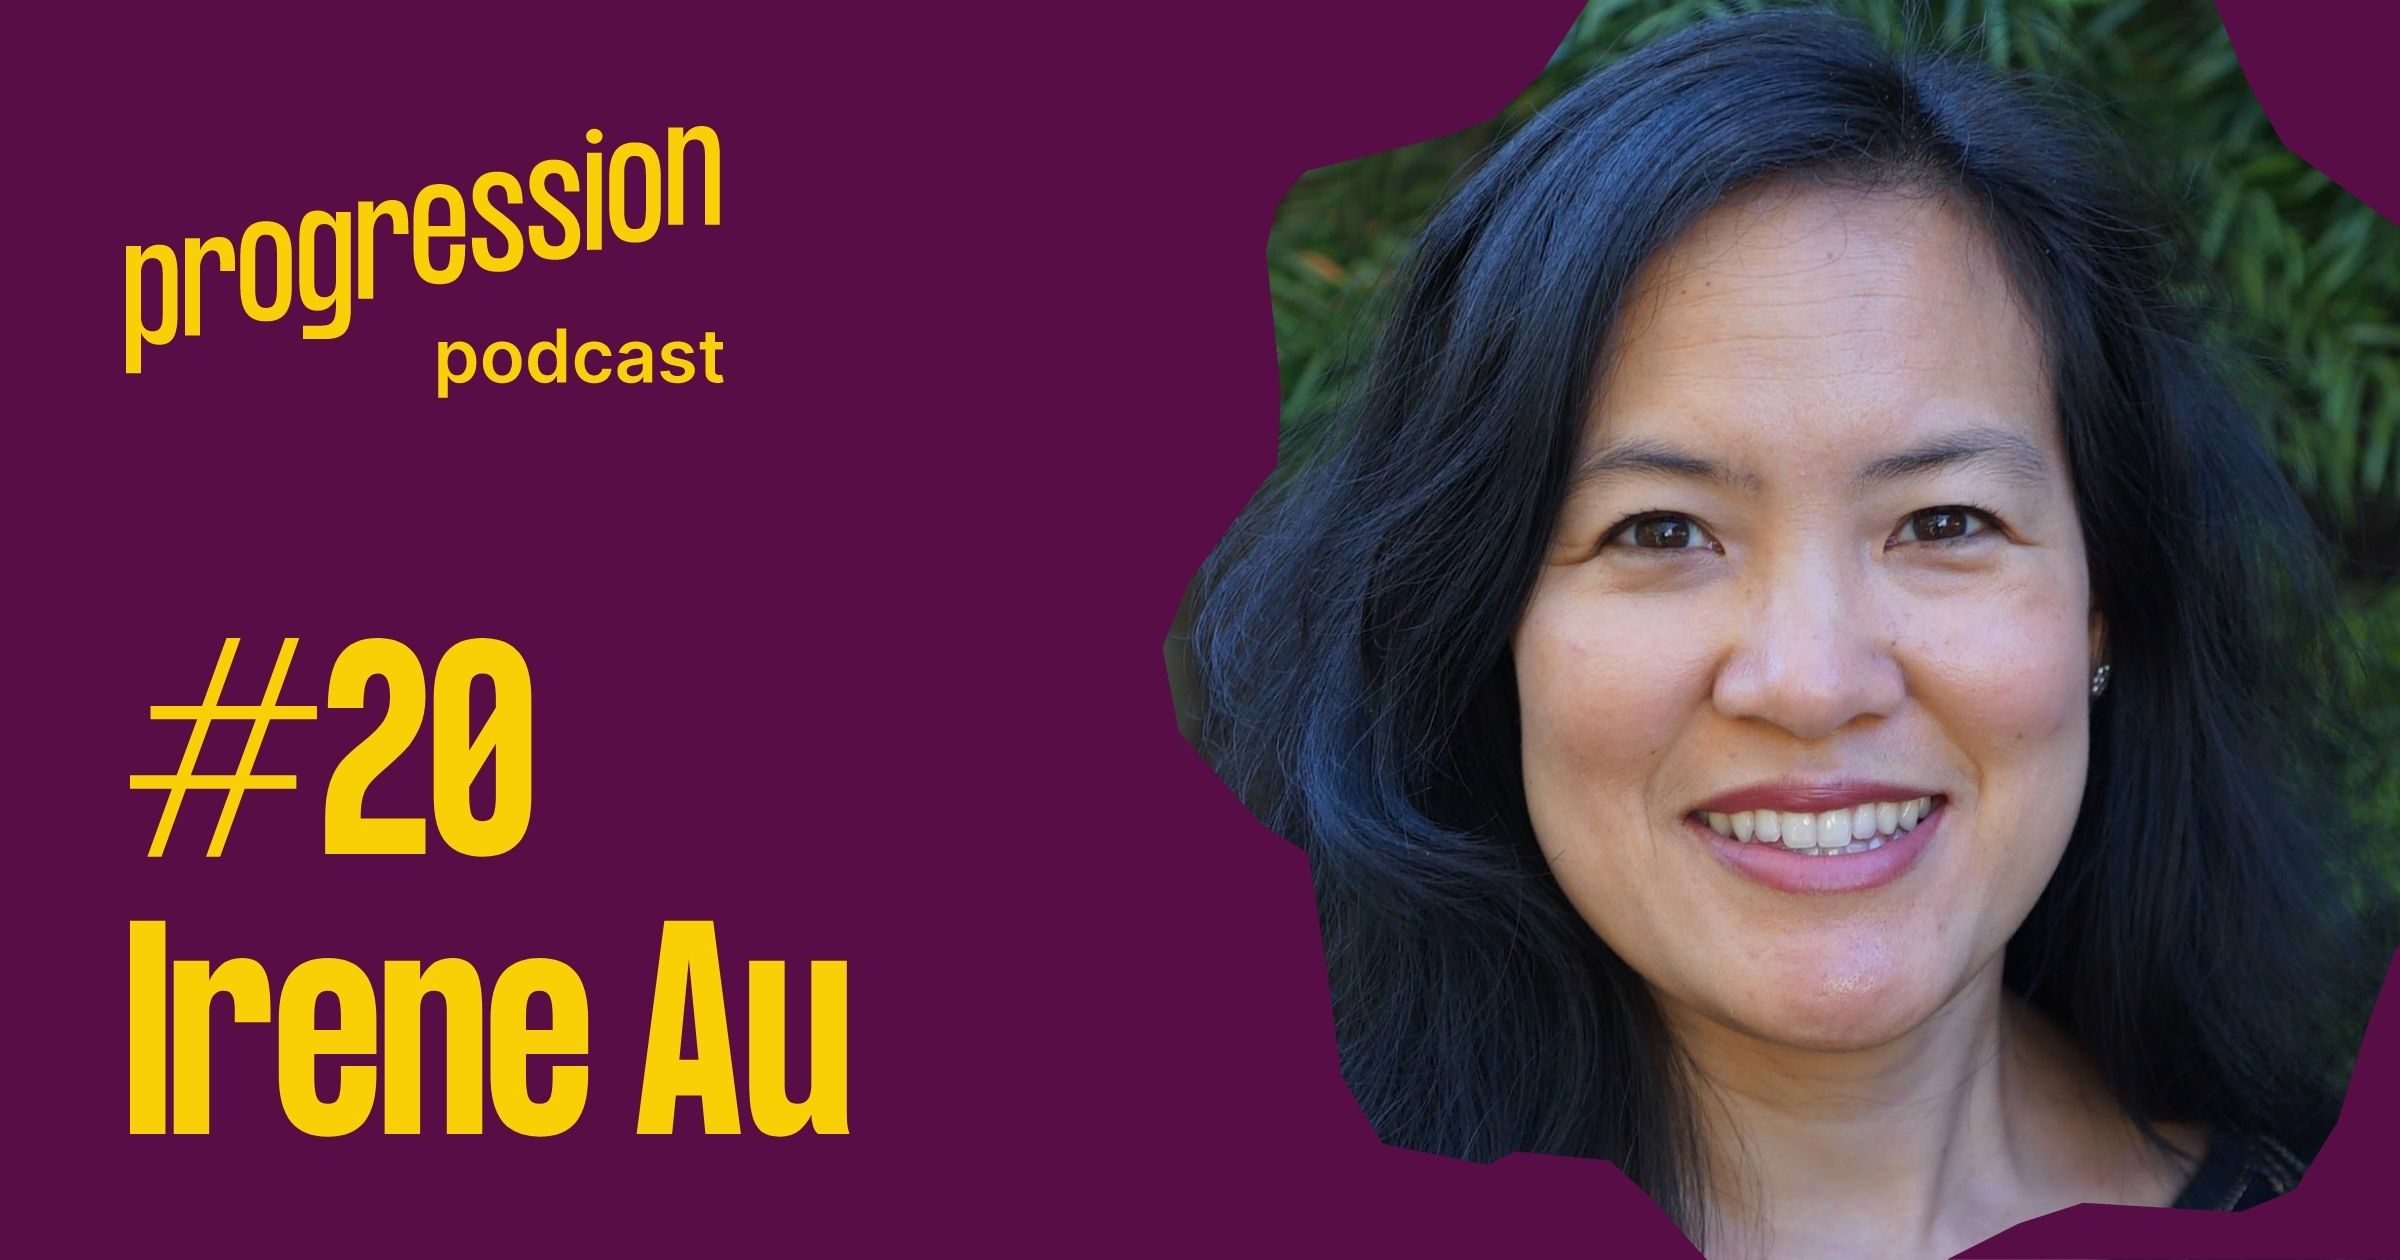 Podcast #20: Irene Au (Khosla Ventures, Google) on scaling design teams and practices, scaling yourself and finding your why